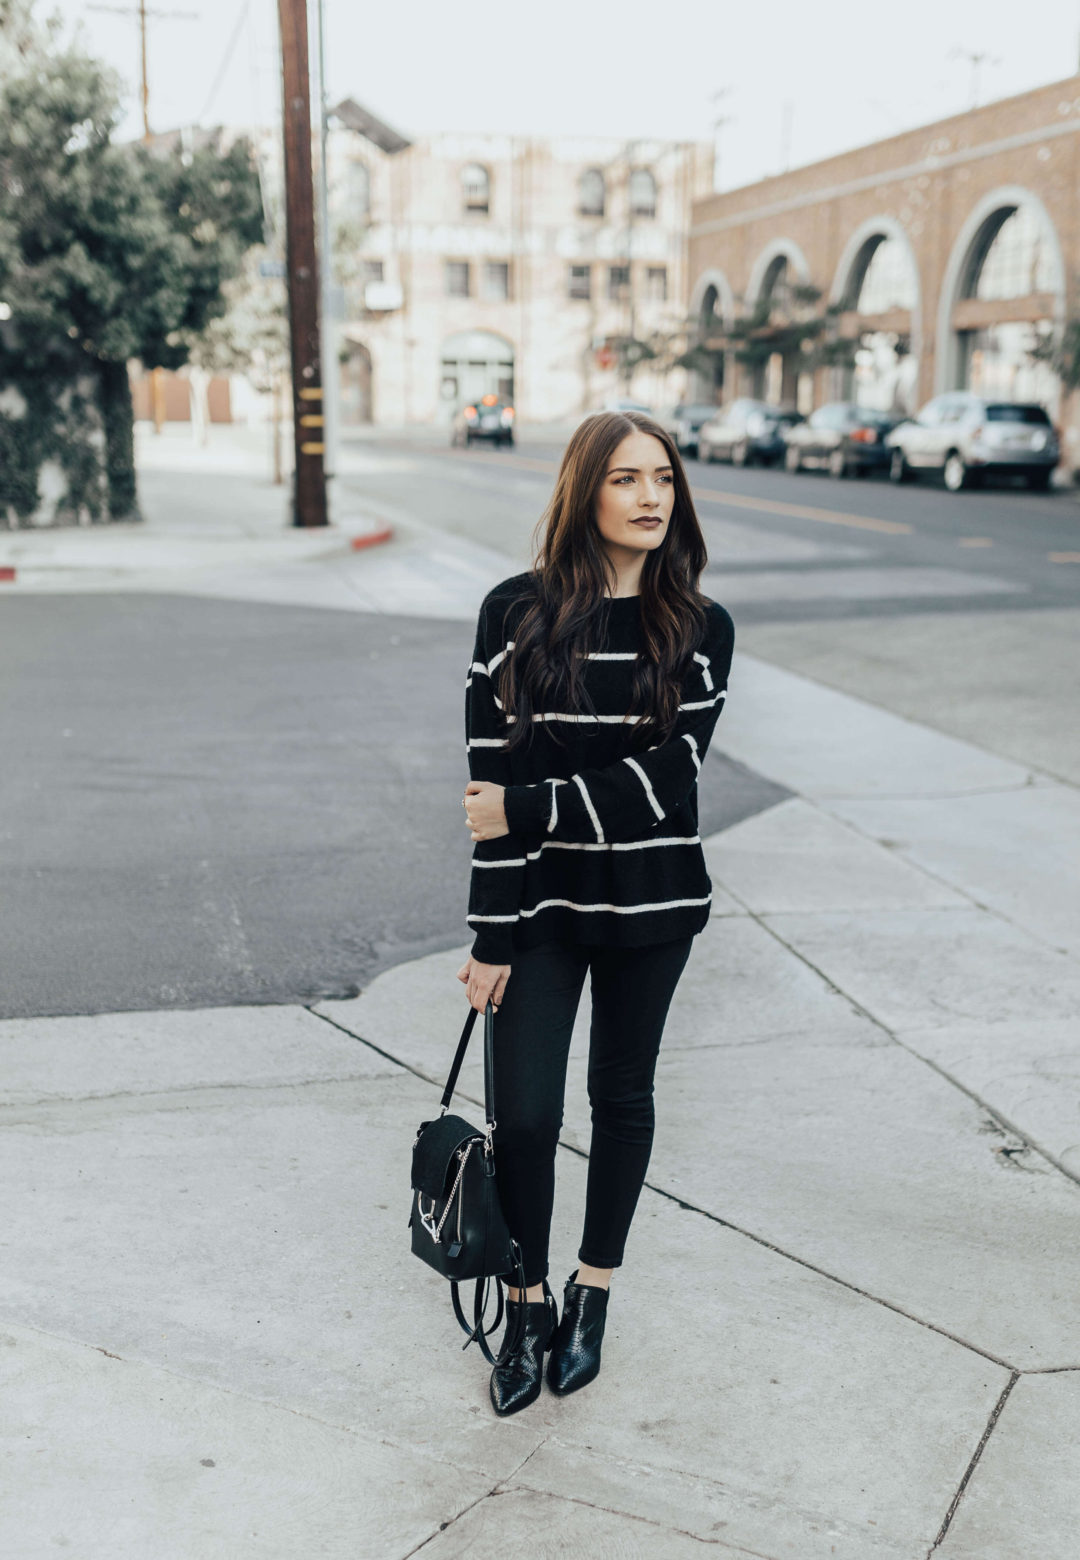 The Perfect Everyday Sweater | Twinspiration